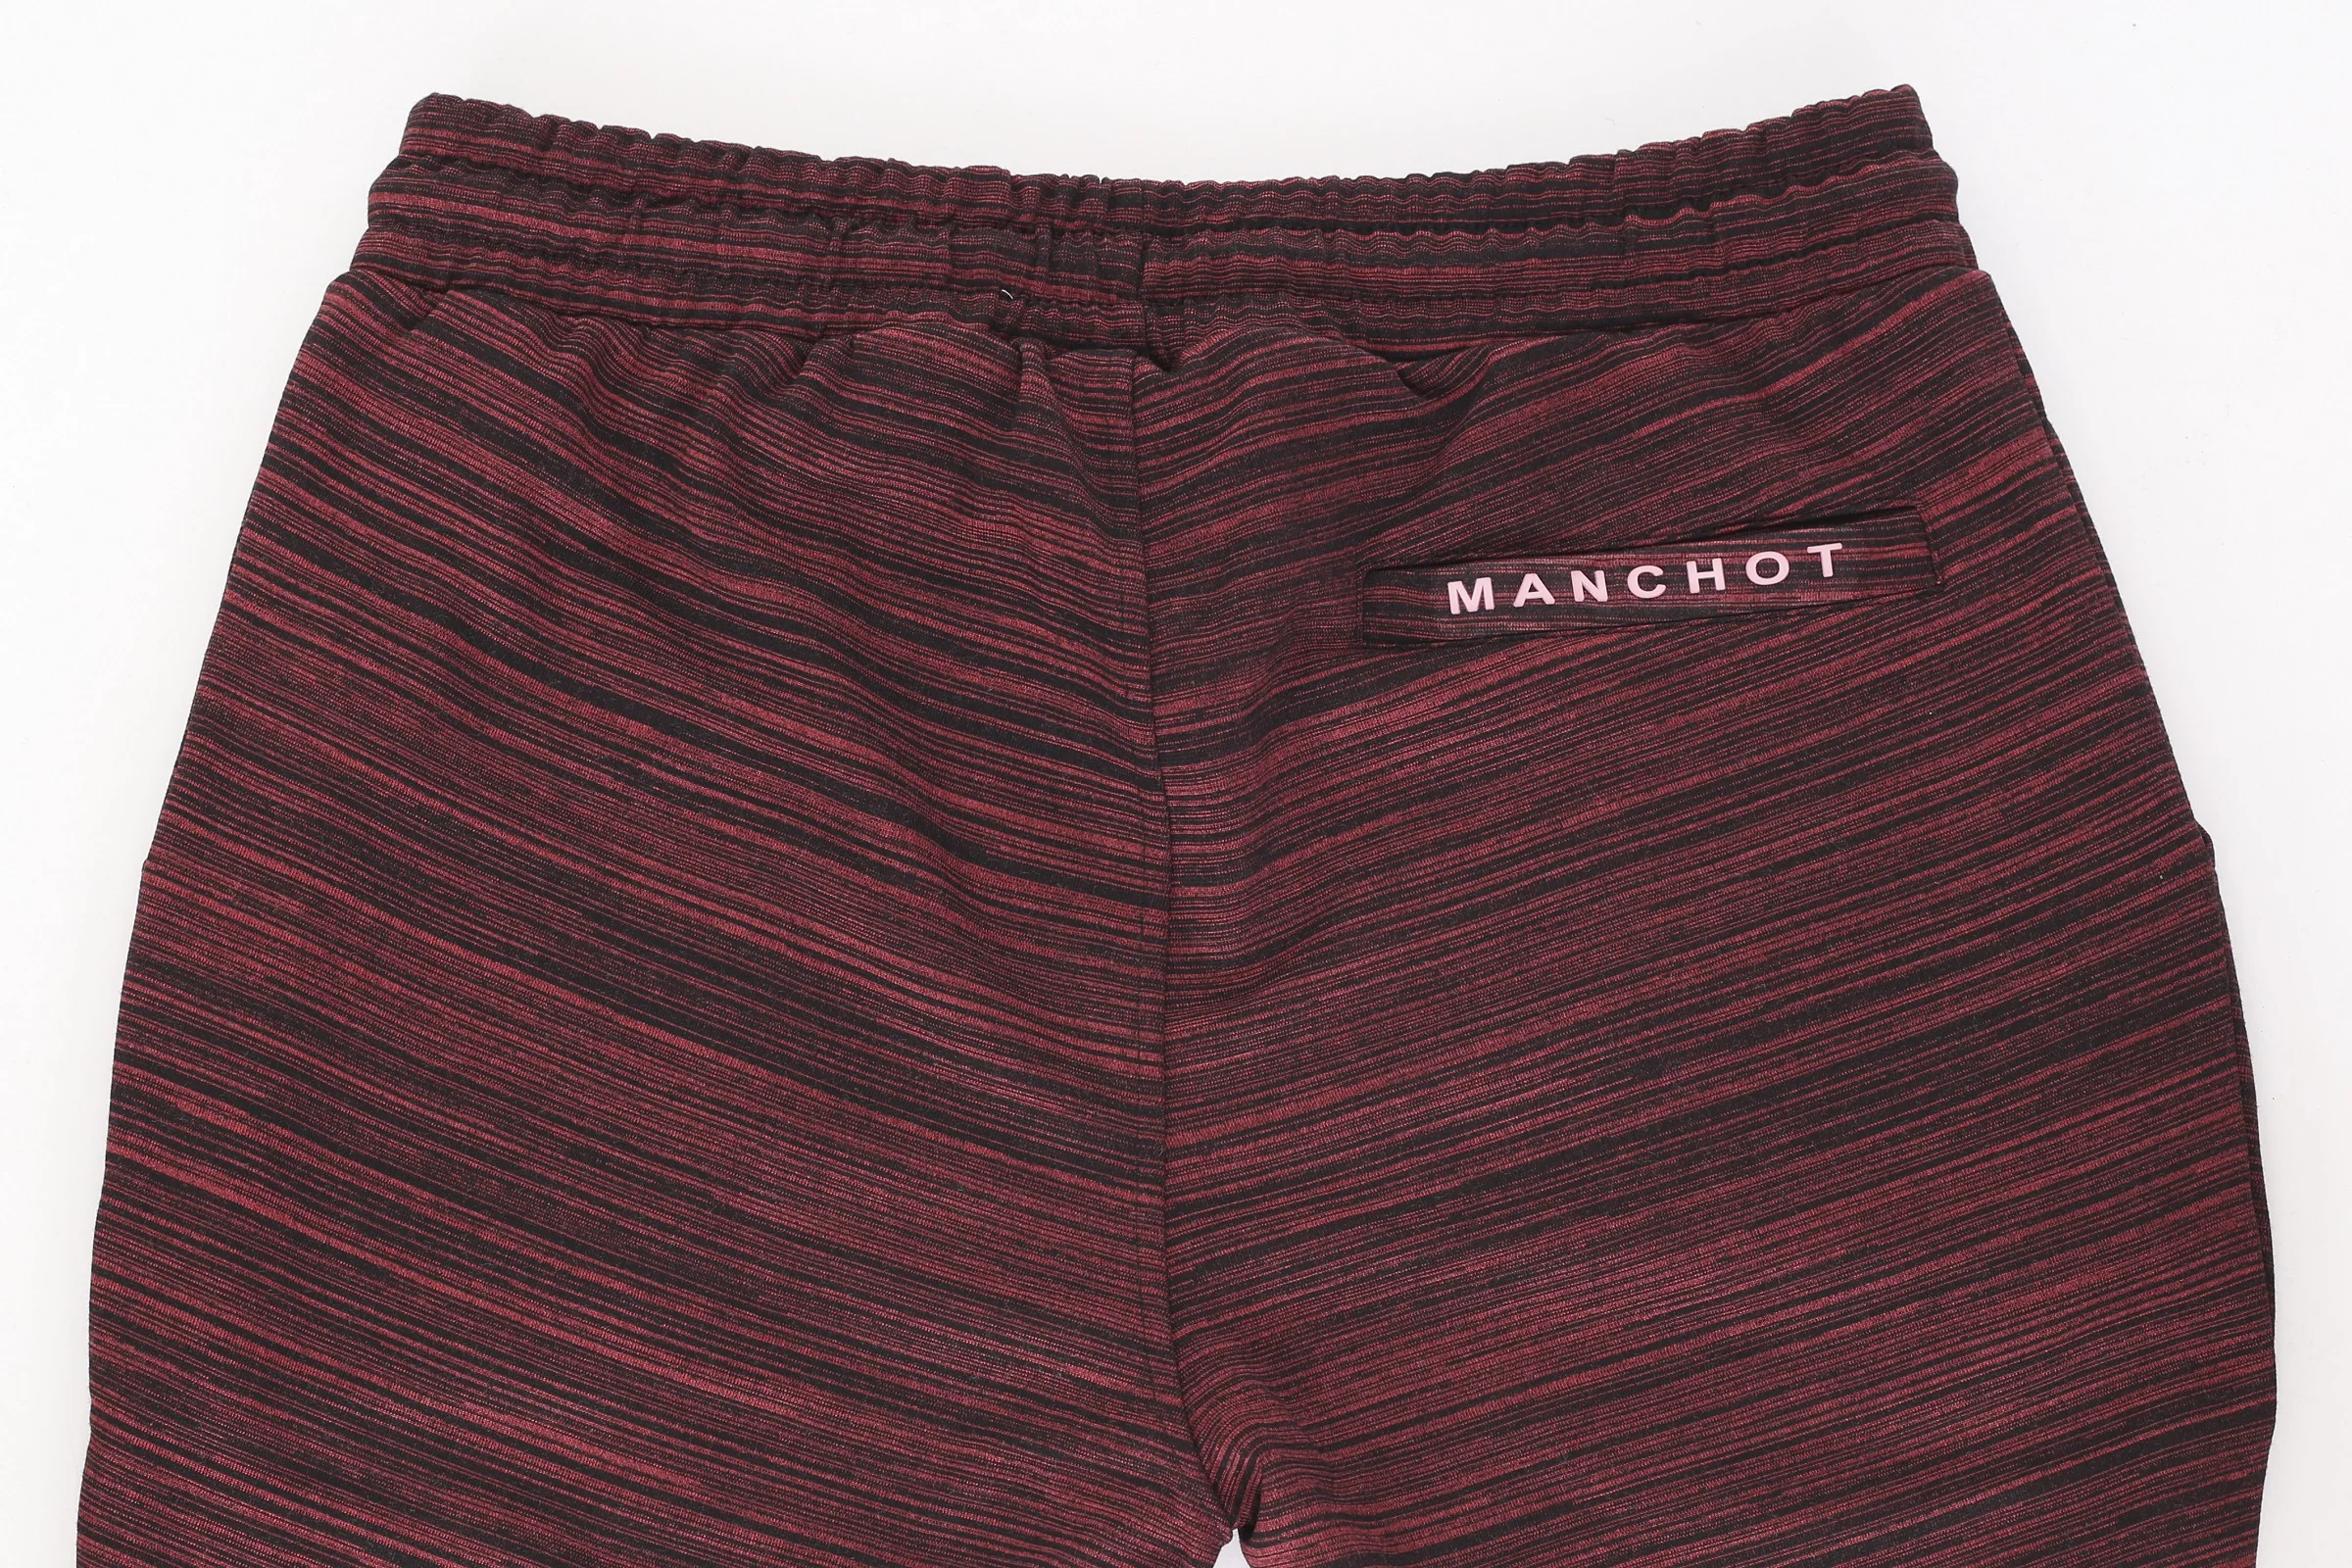 

MANCHOT MENS SWEATPANTS JOGGERS TRAINERS Maroon Claret RED Gift For Men SLIM FIT Skinny MICRO REAL EUROPEAN SIZE HOMME ISTANBUL